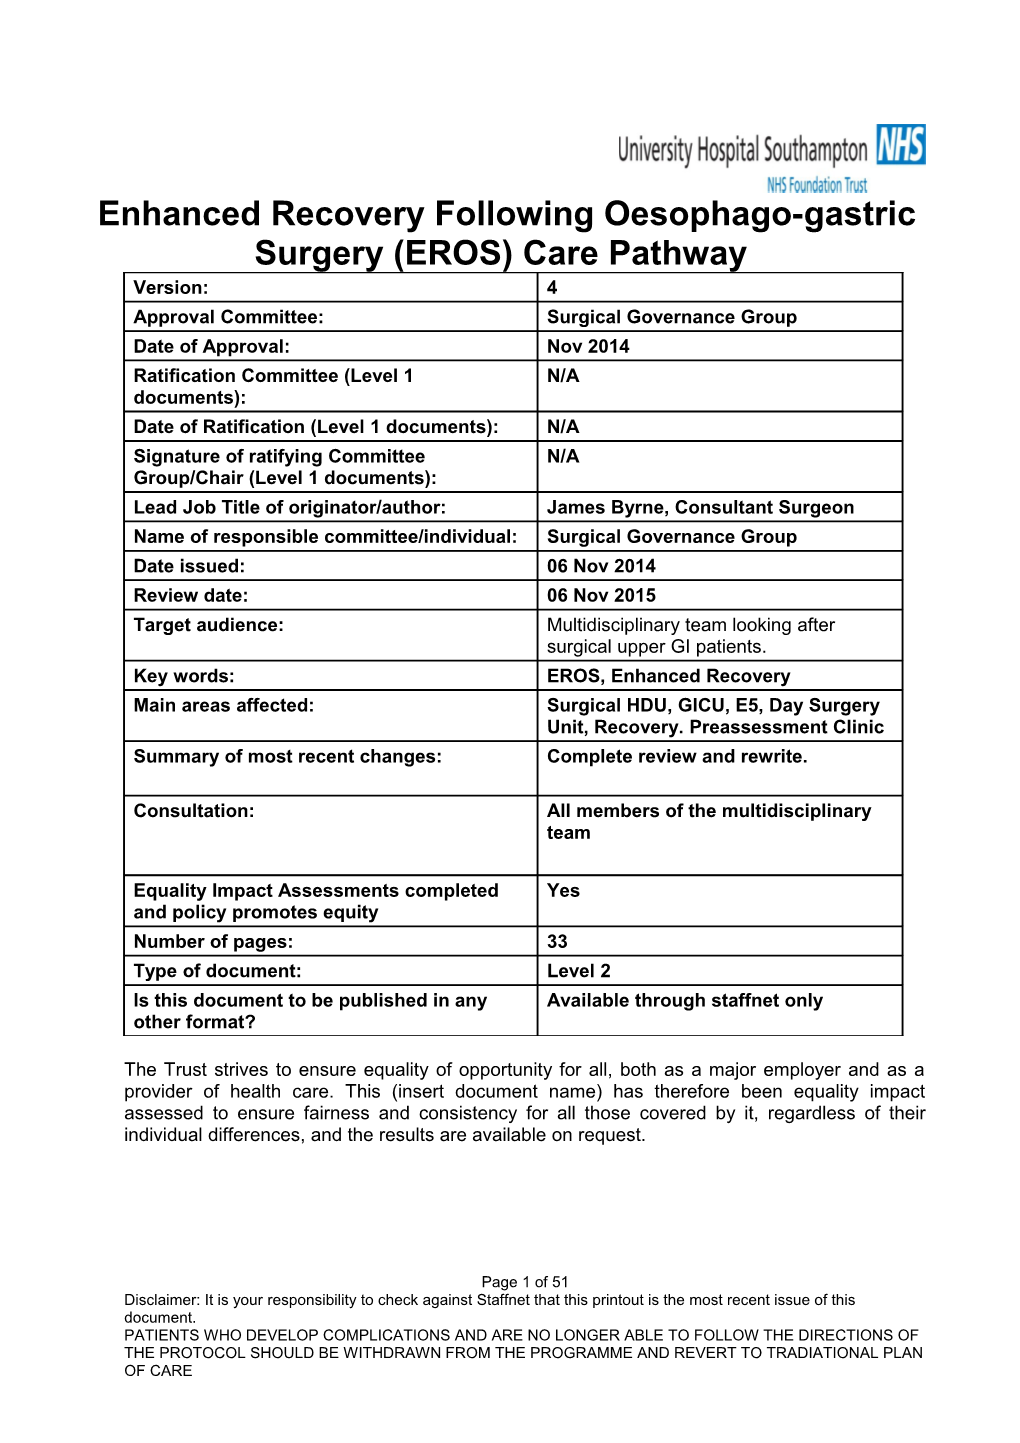 Enhanced Recovery Following Oesophago-Gastric Surgery (EROS) Care Pathway